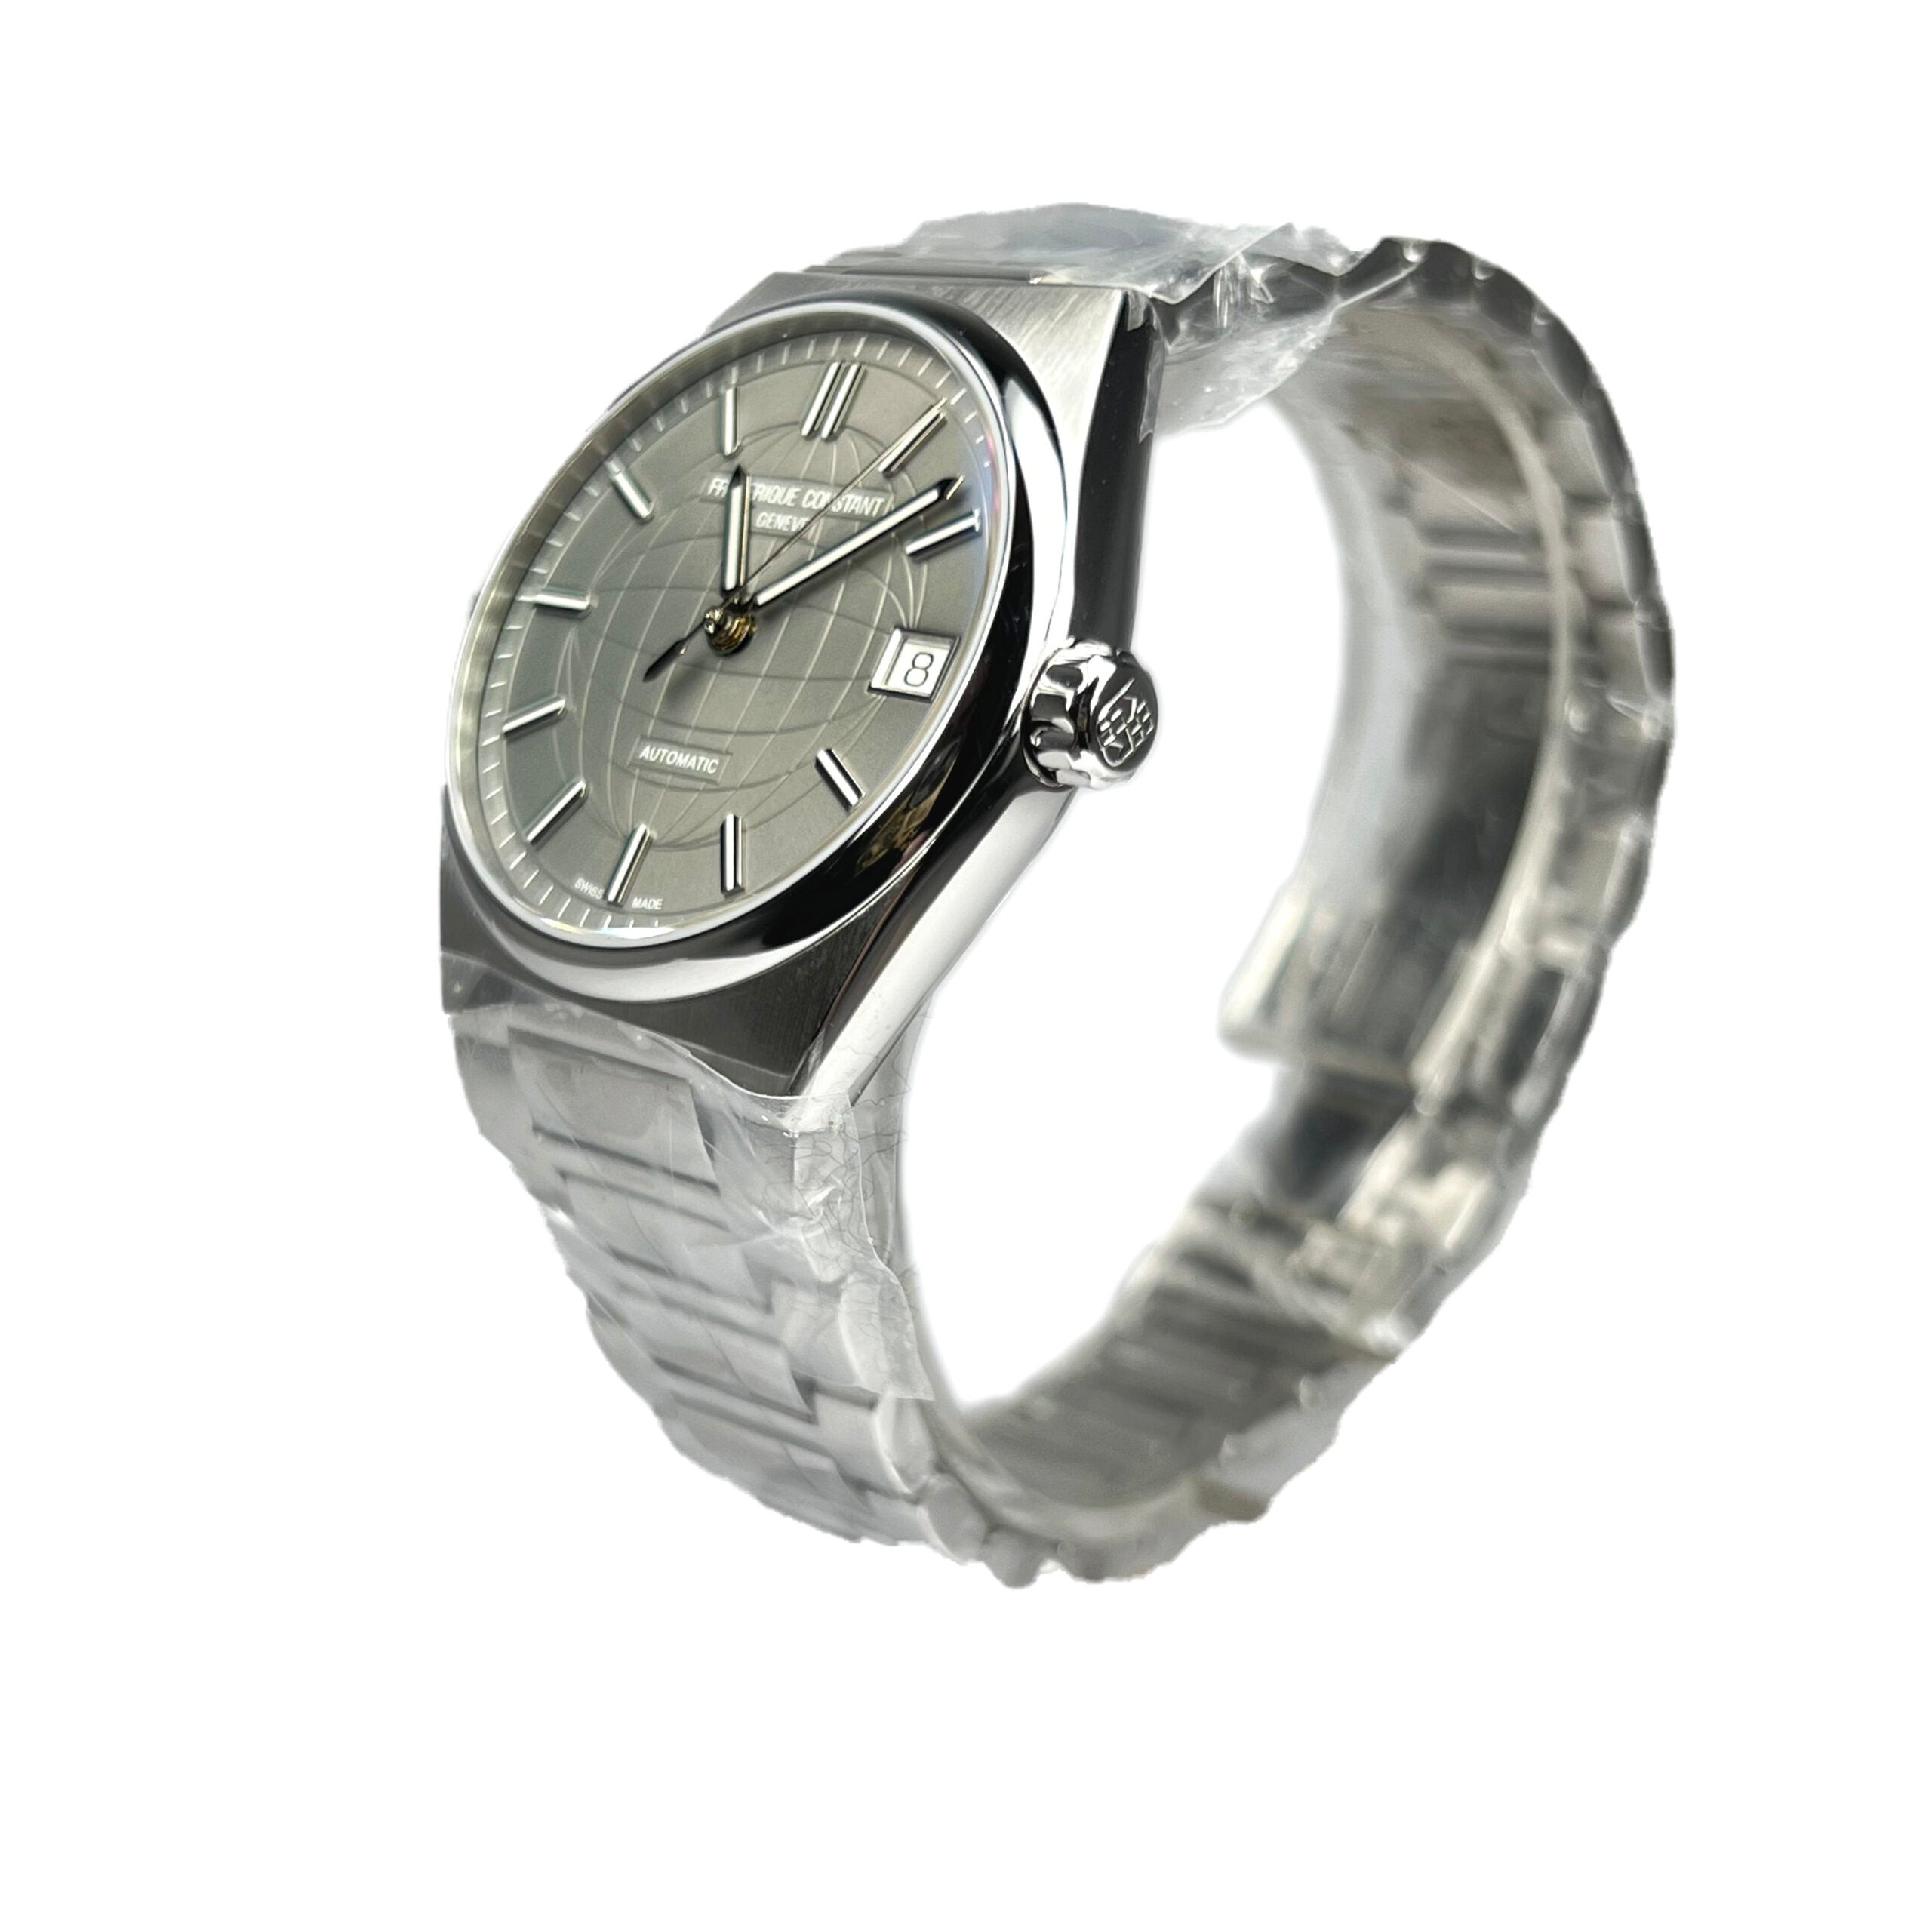 Frederique Constant Highlife Stainless Steel Lady's Watch